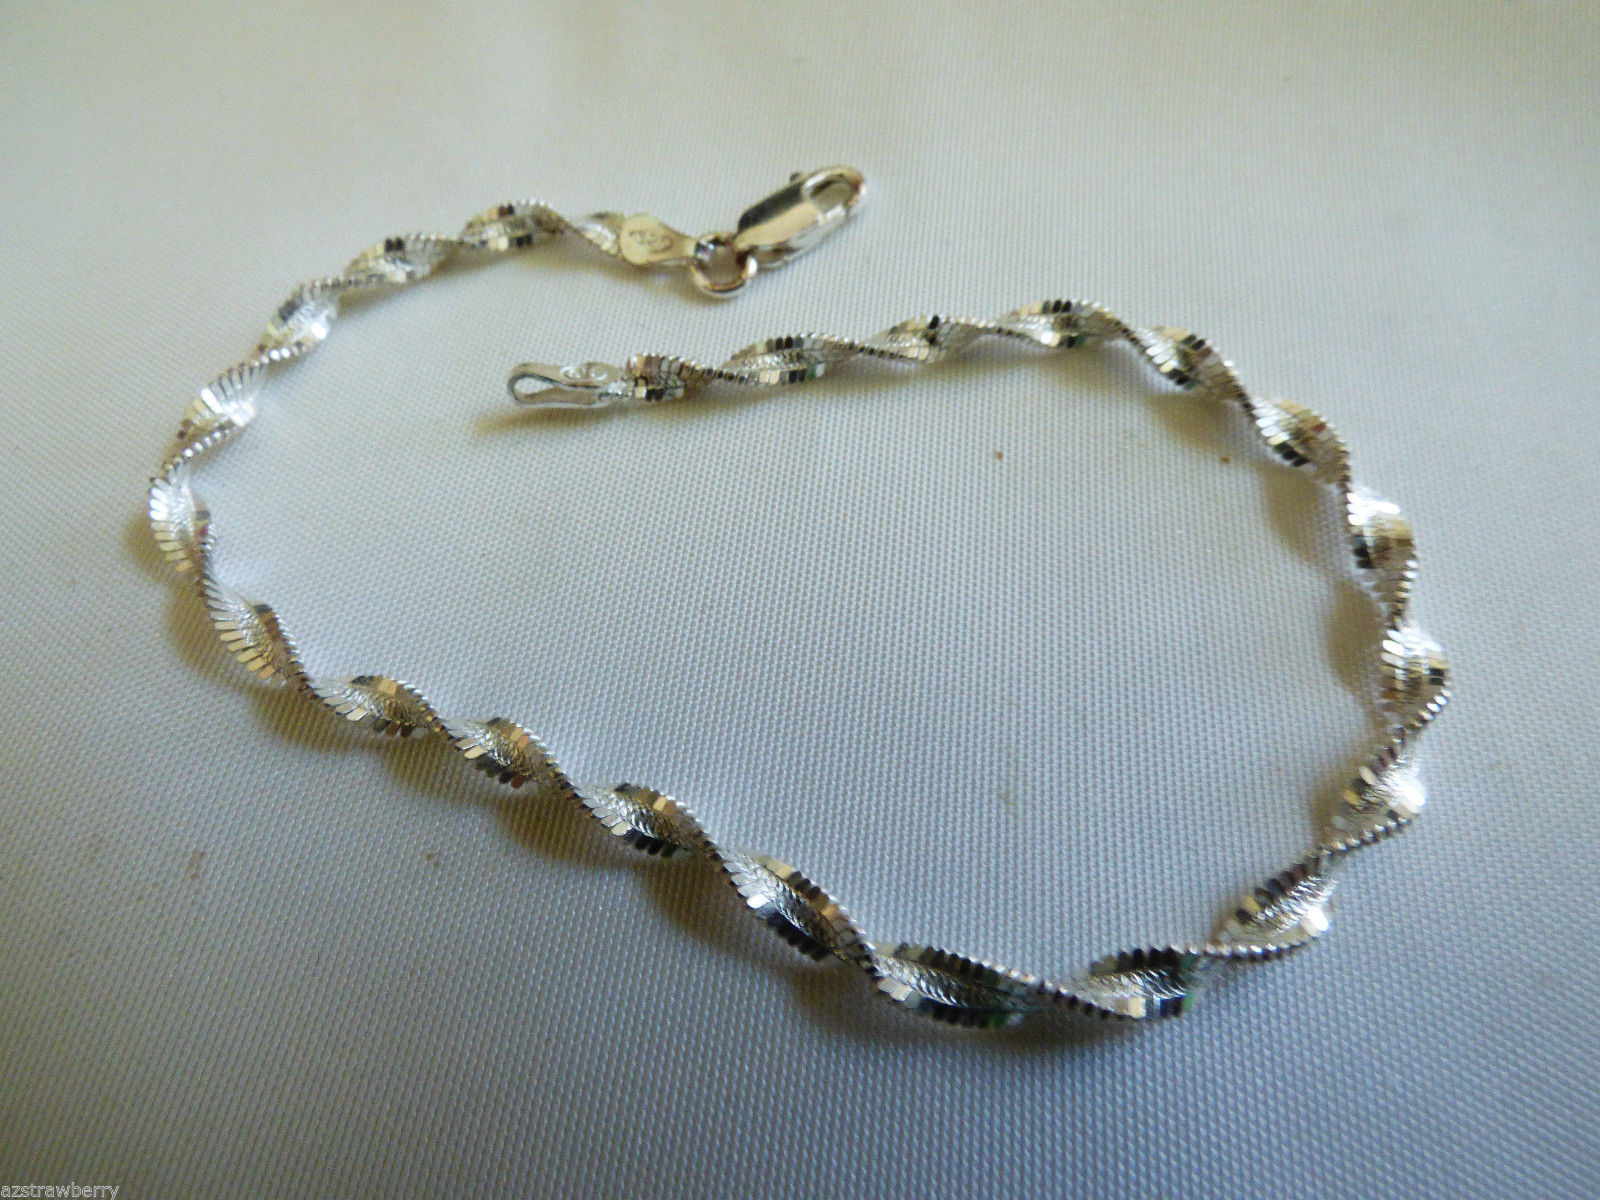 925 Sterling Silver Italy Rope twist Chain Link Bracelet 7.25"L - $41.58